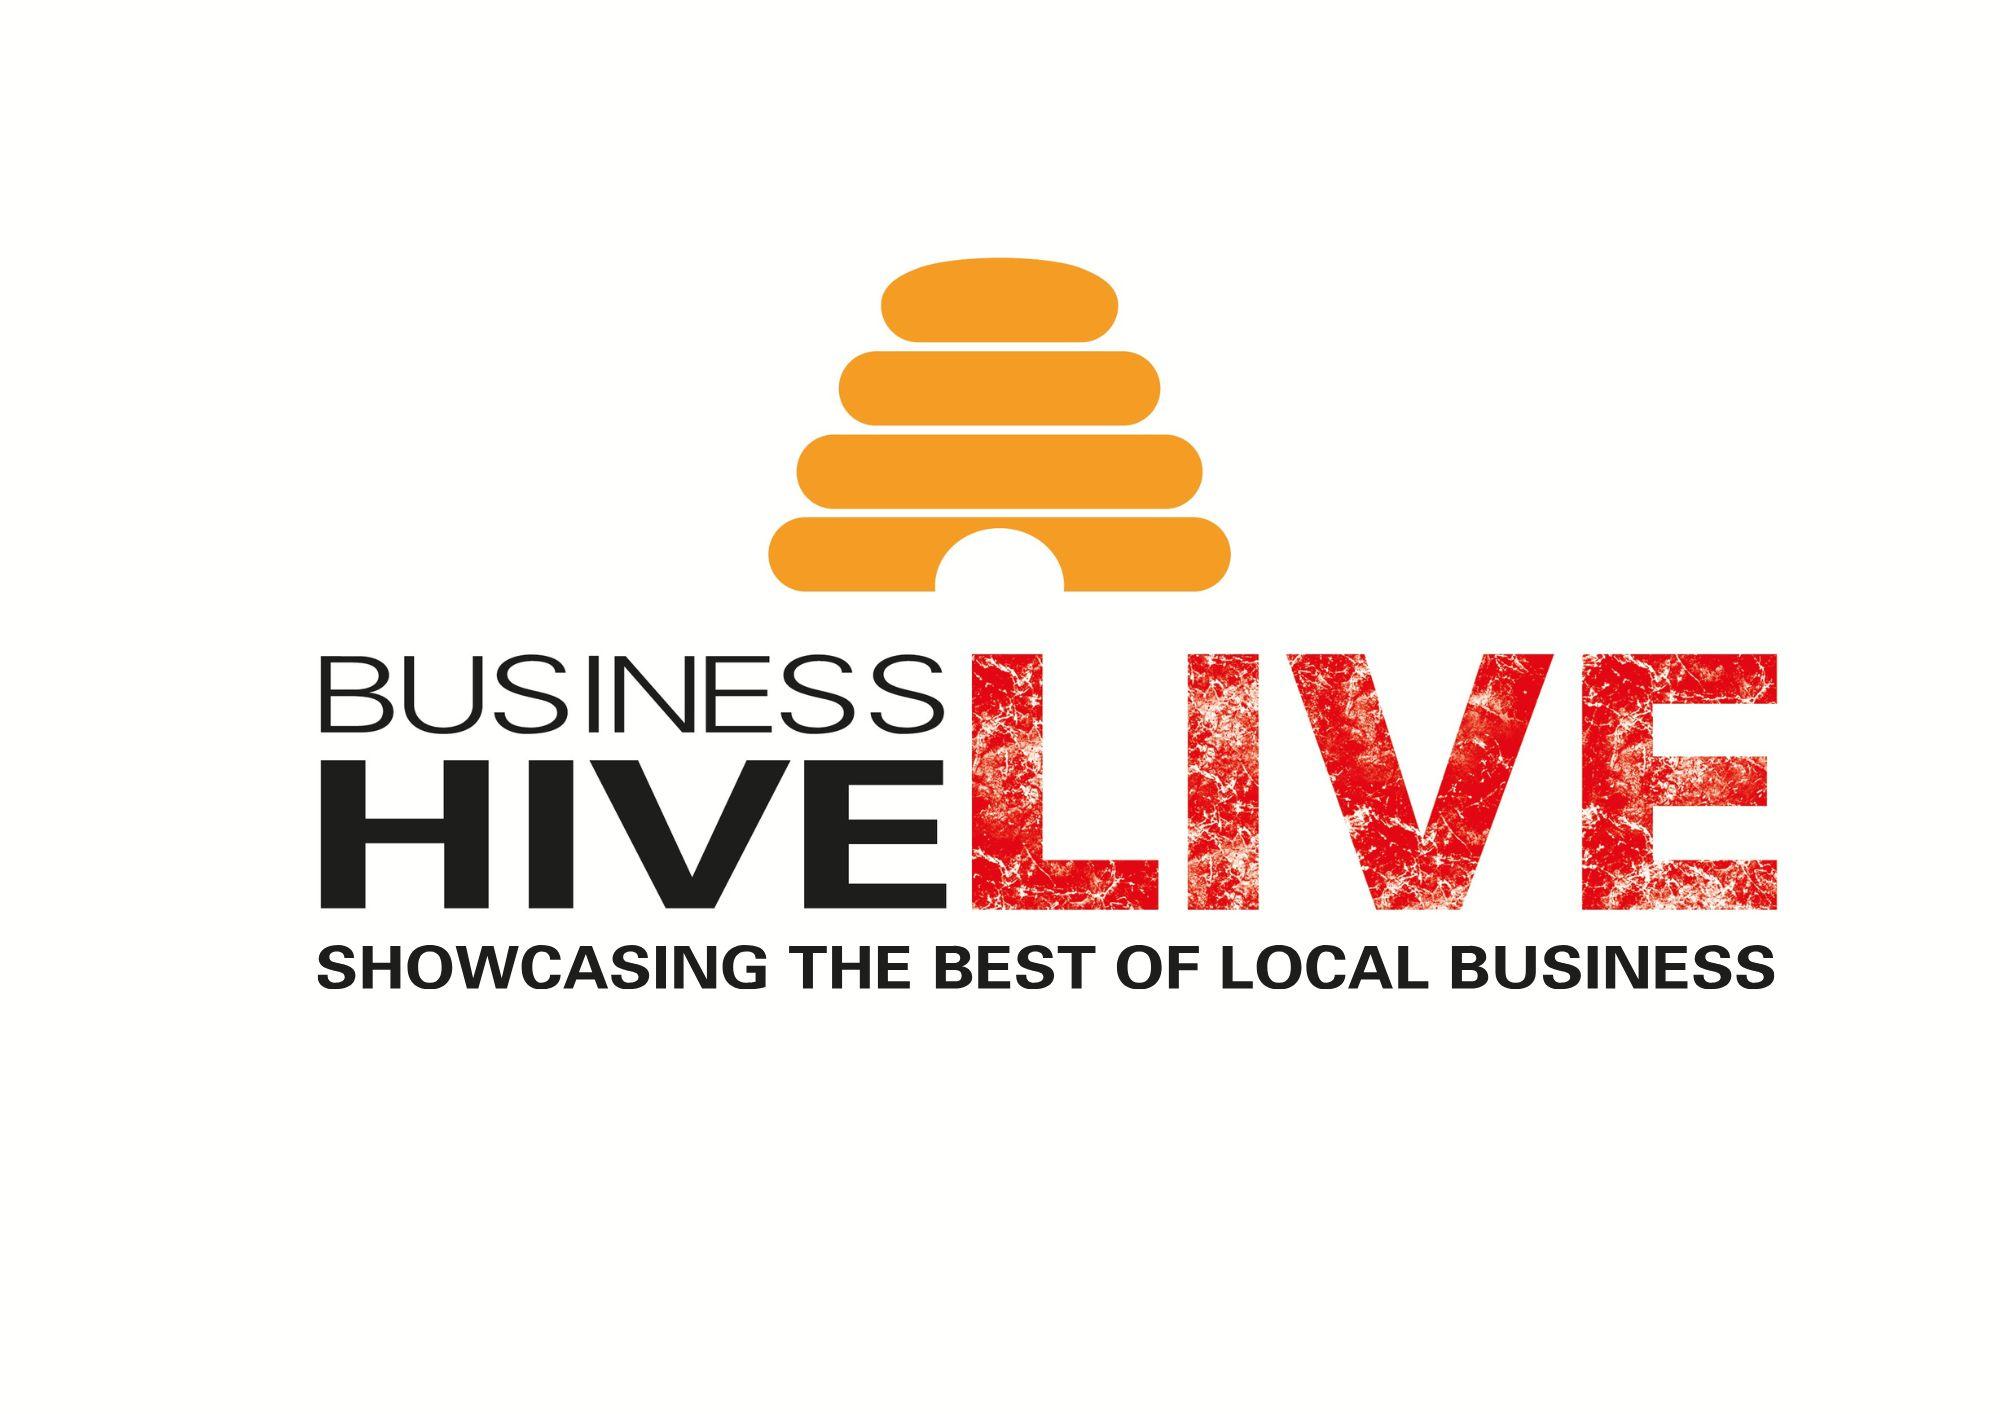 Experience the ultimate showcase of local businesses with Business Hive Live.